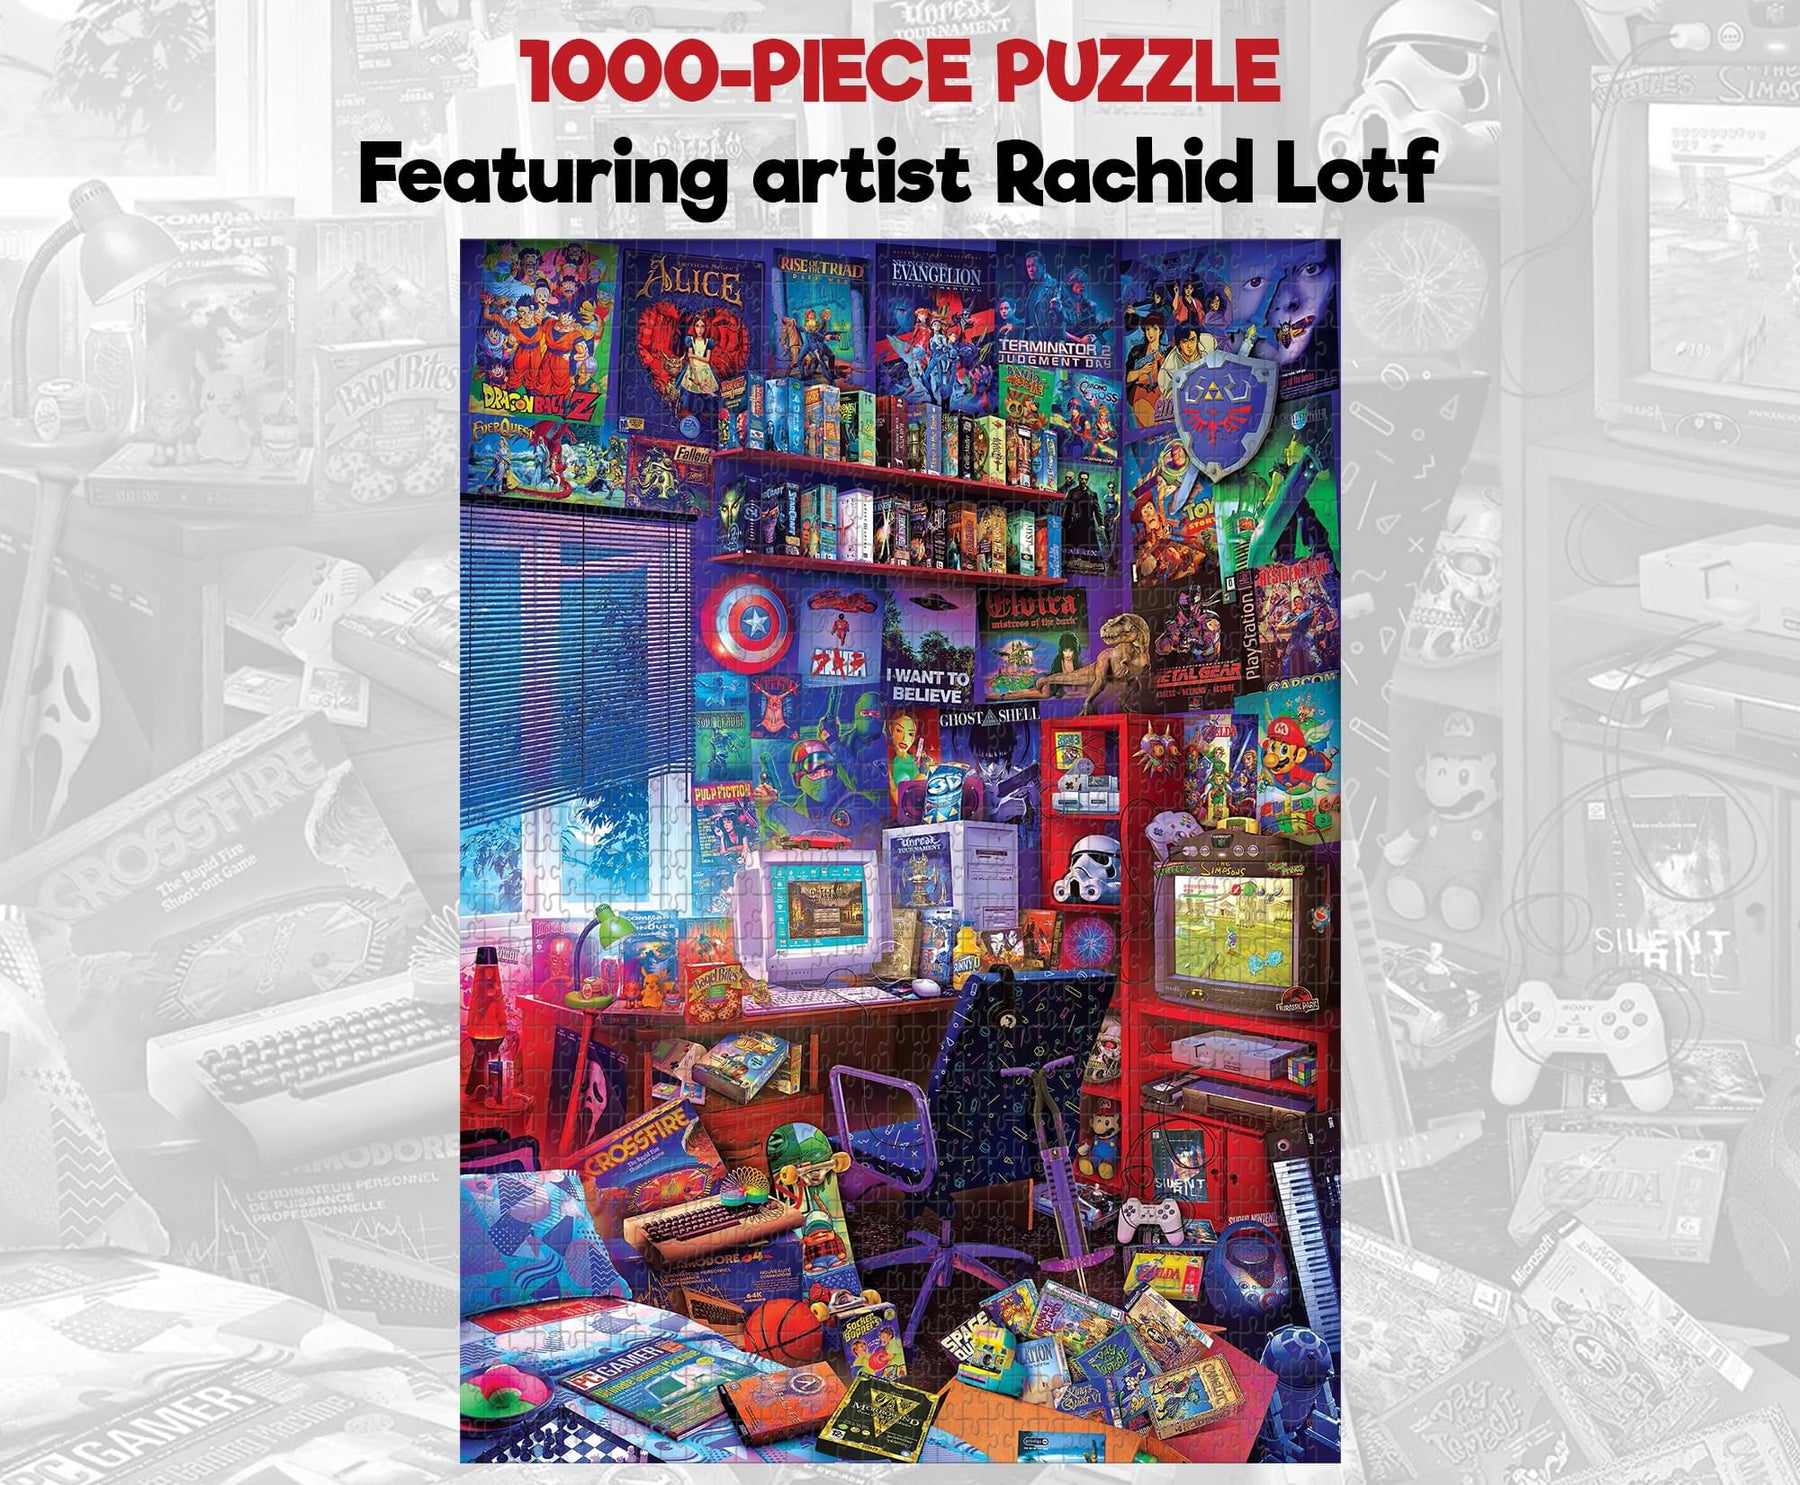 Solving 9000 Pieces The Greatest Disney Collection Puzzle - Part 2 